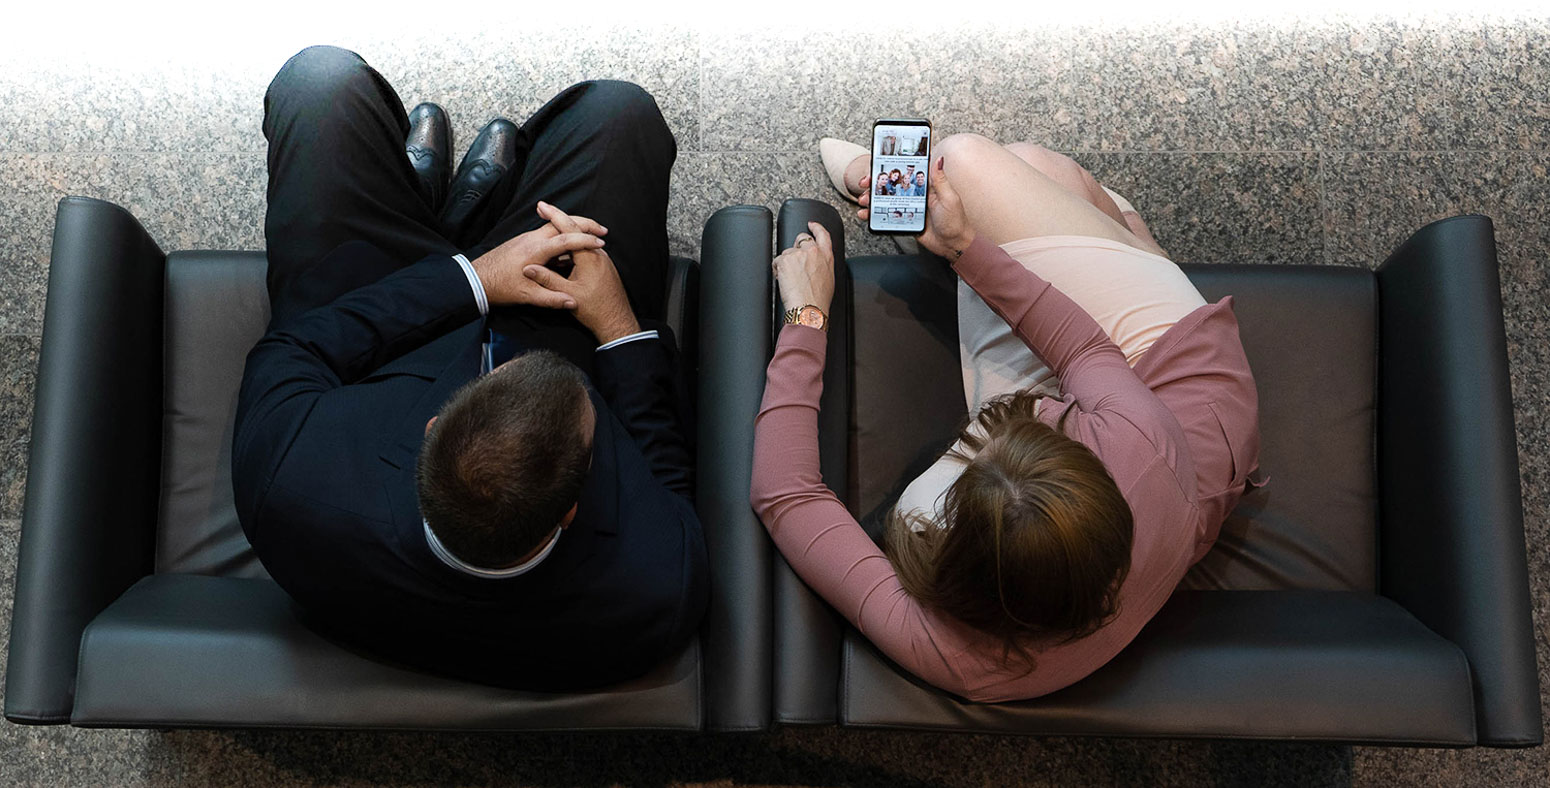 Two persons sitting on couch consulting cellphone